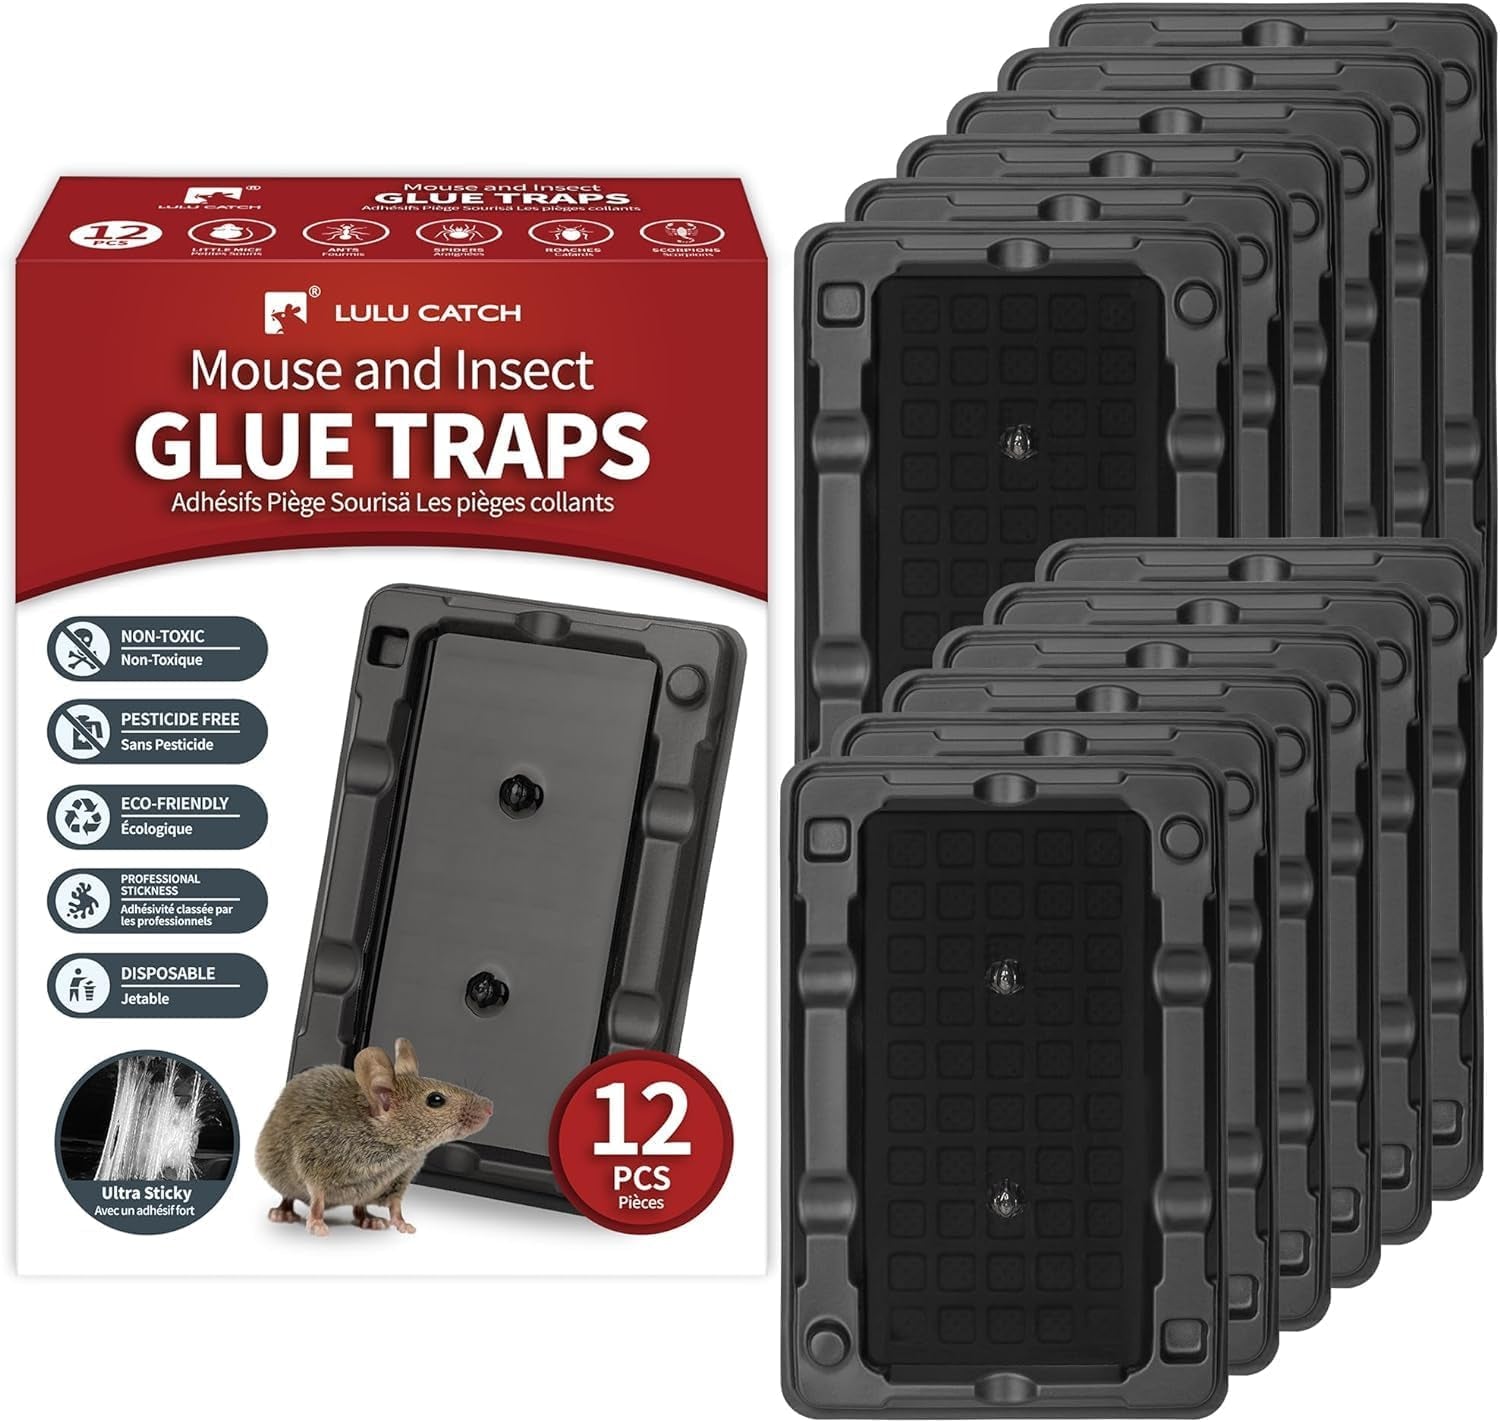 Where can I buy TrapX Mice Gel?